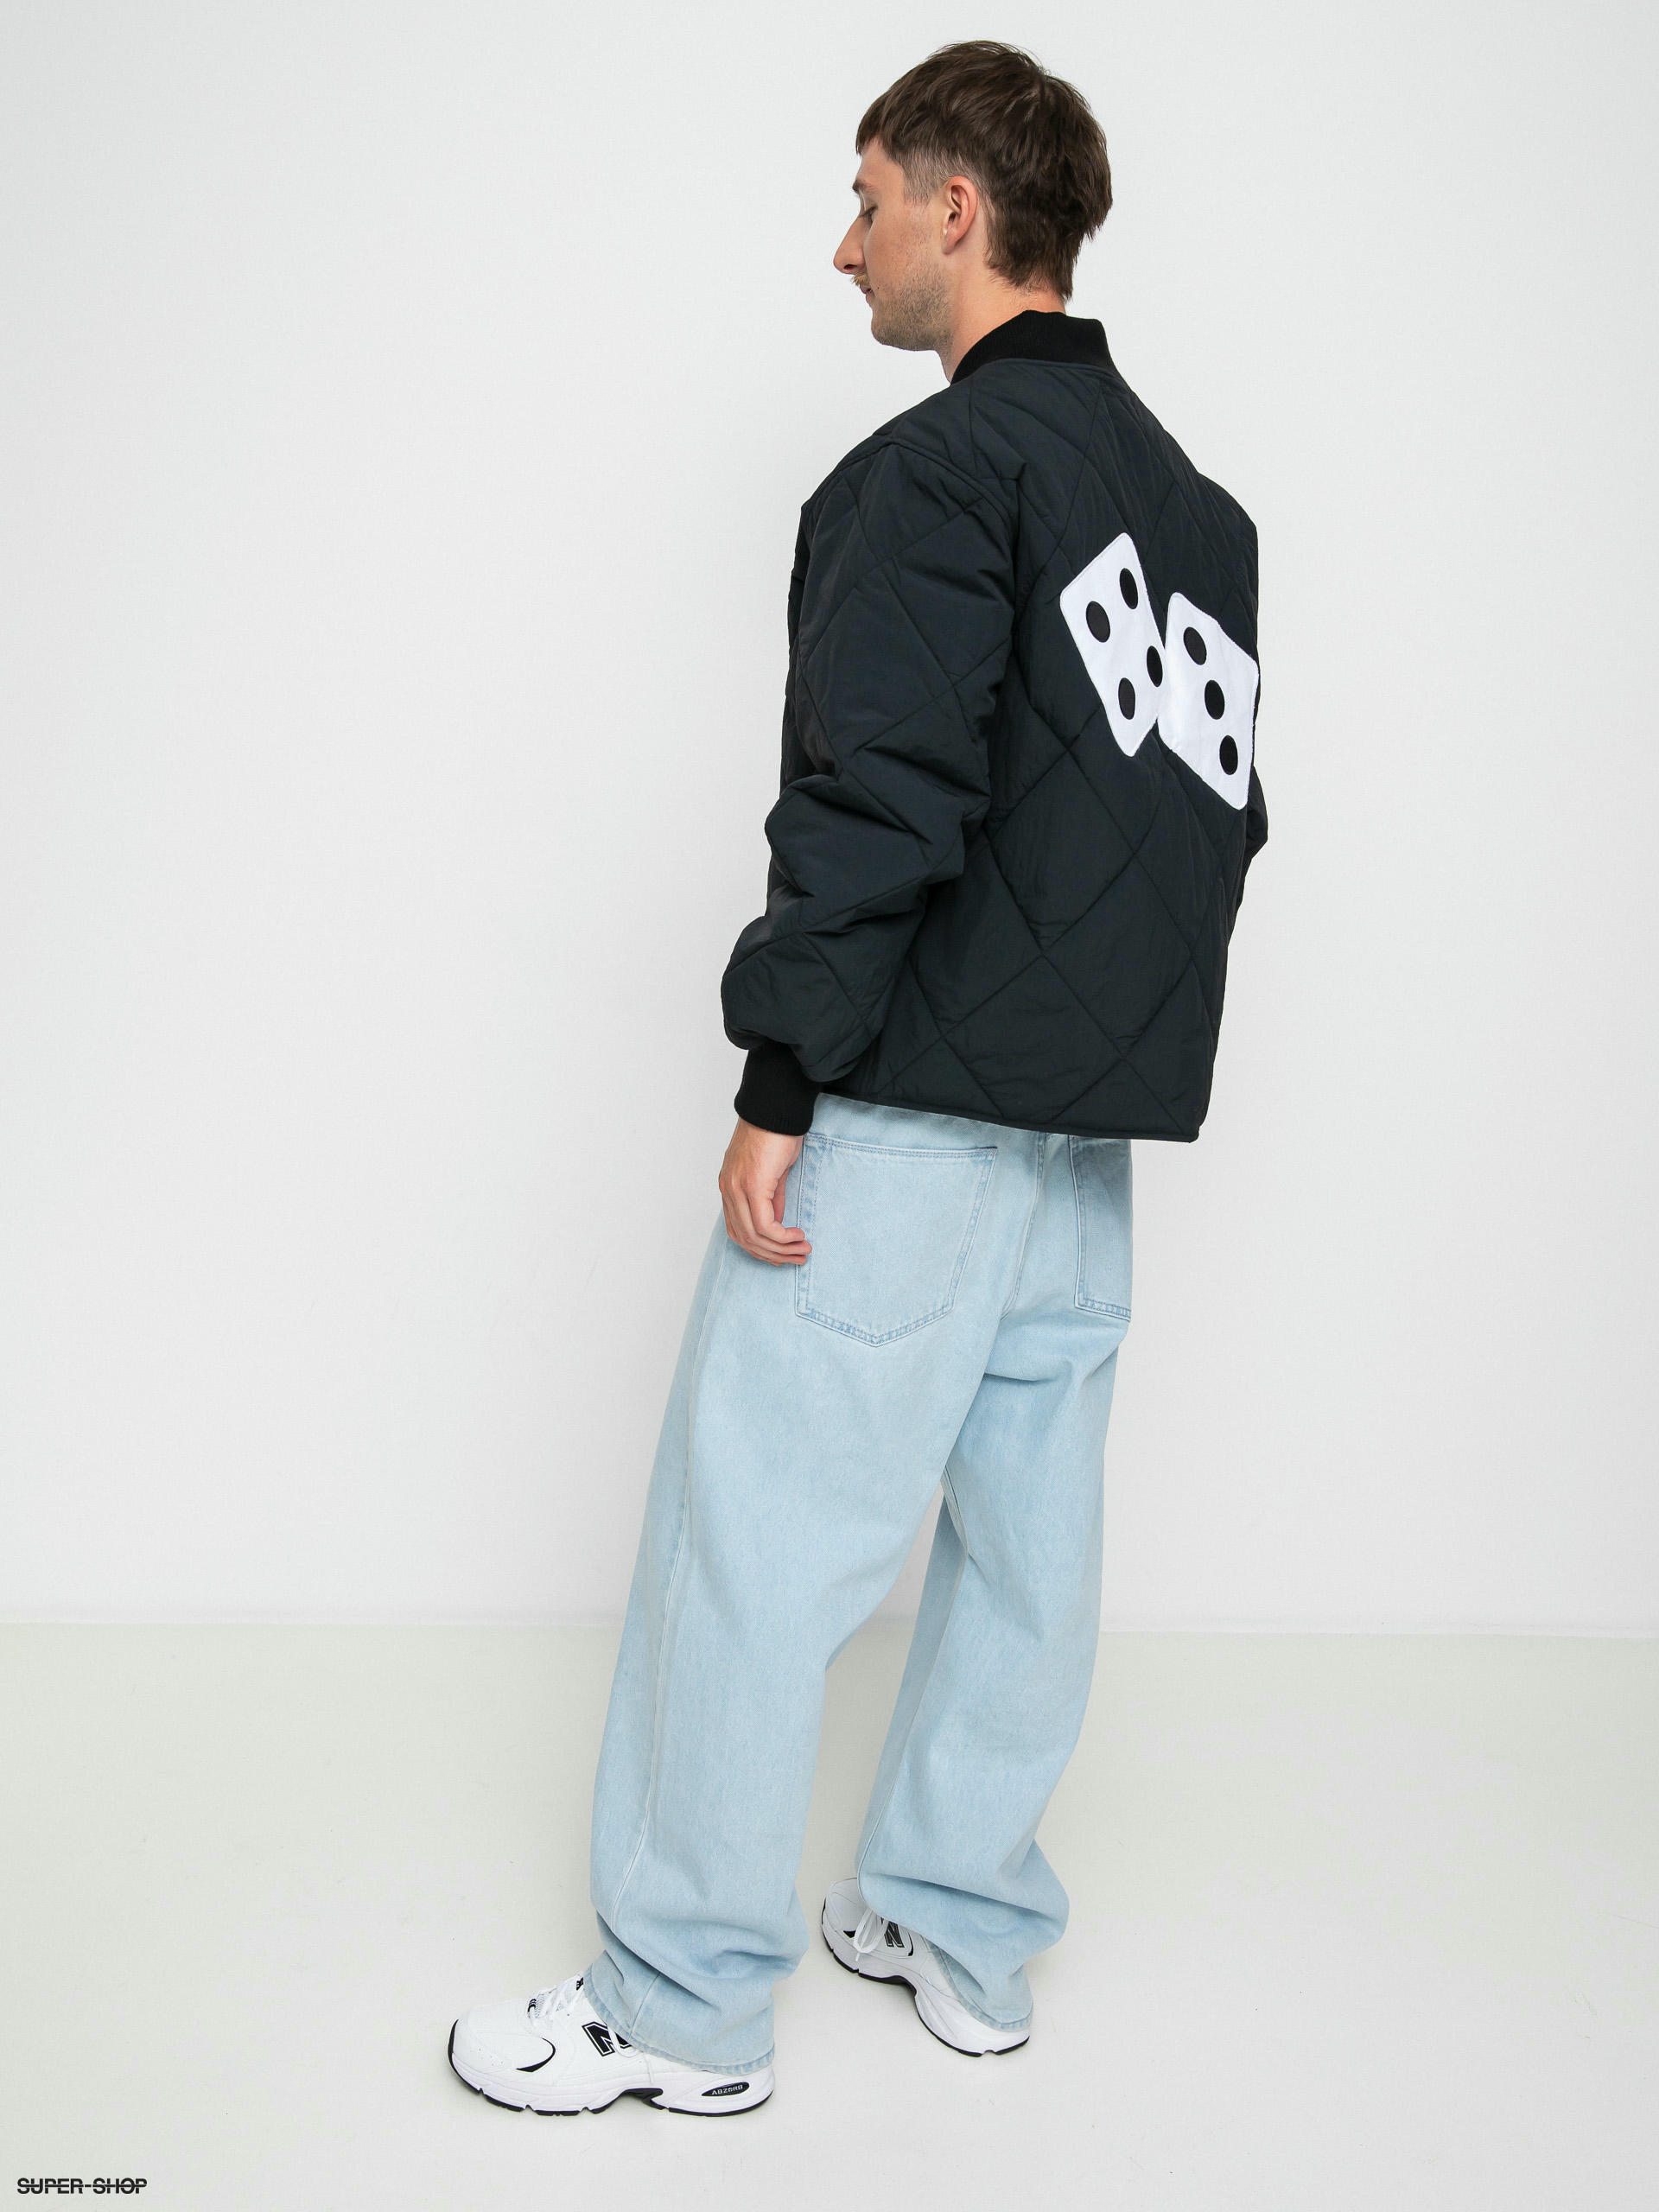 22aw stussy dice quilted jacketメンズライクストリートvest